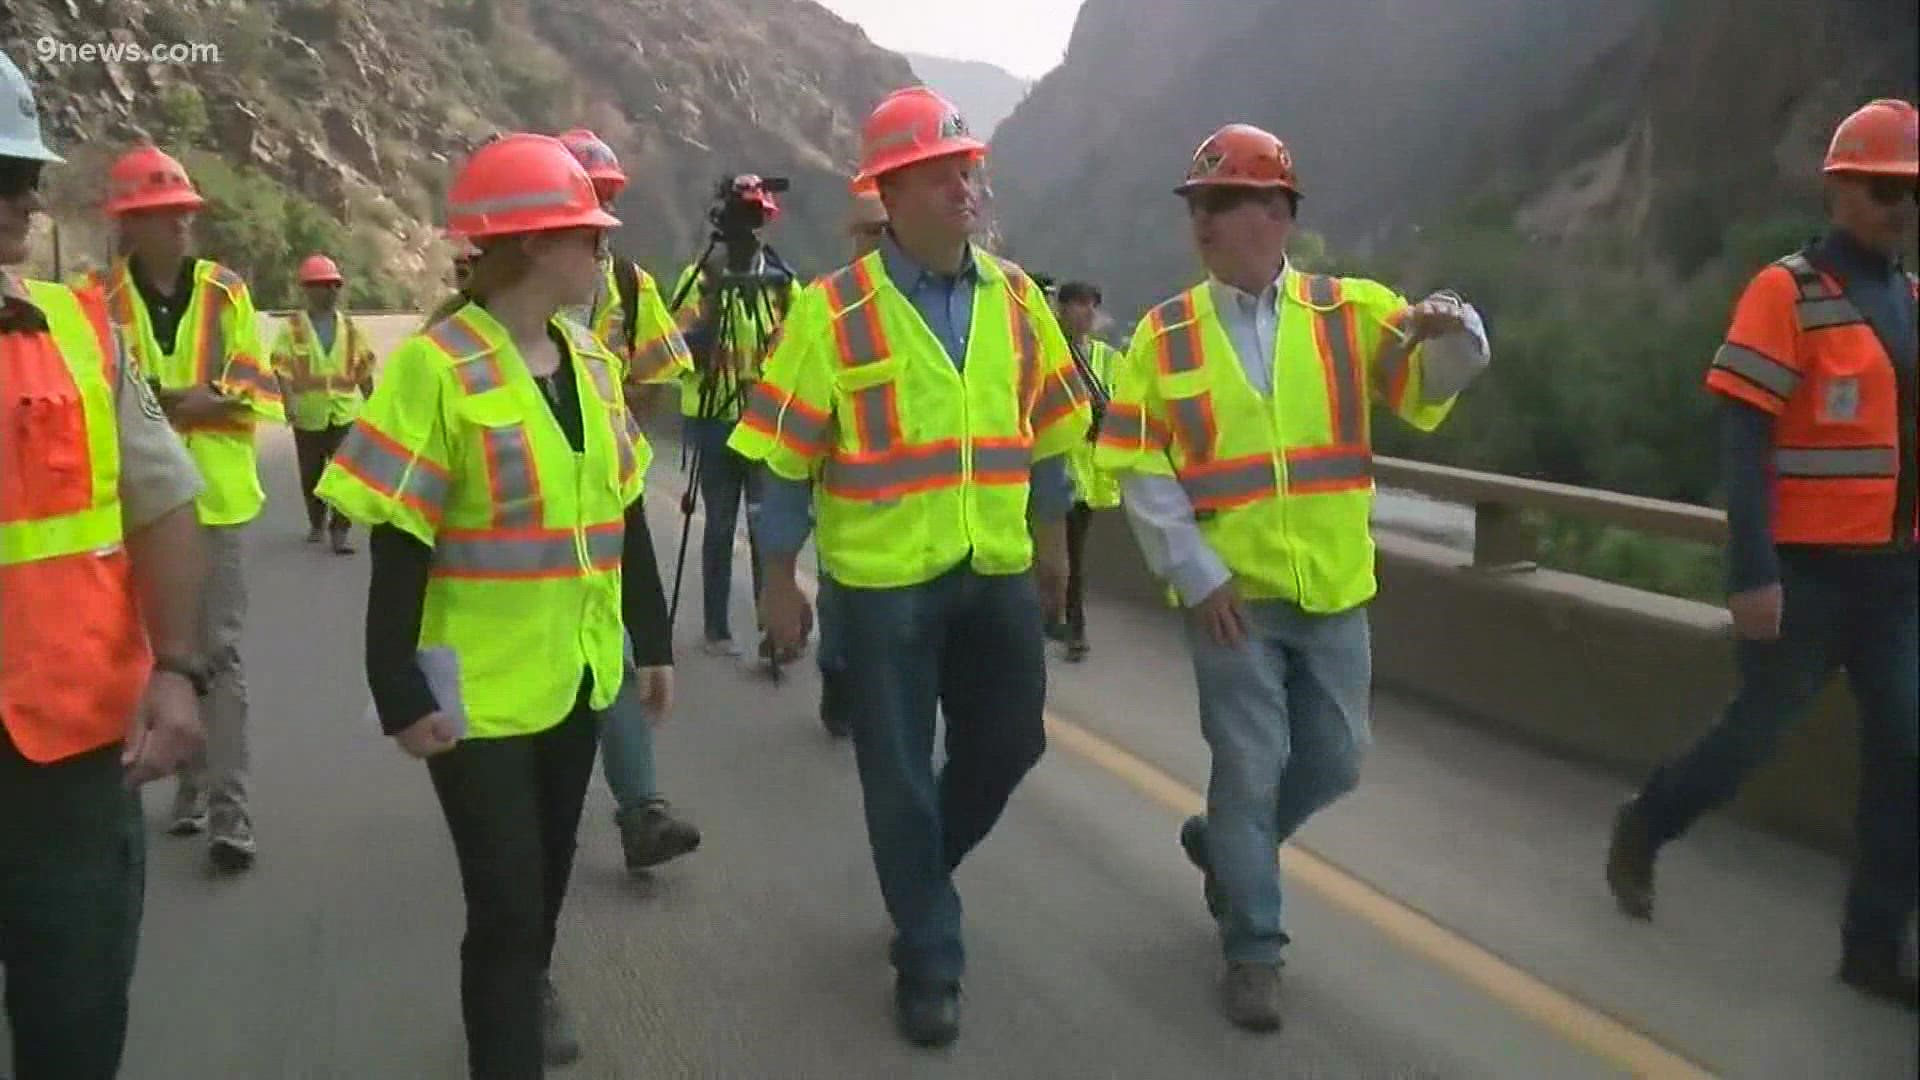 Gov. Polis visited Glenwood Canyon to survey the damage caused by mudslides that have kept the road closed for nearly two weeks.